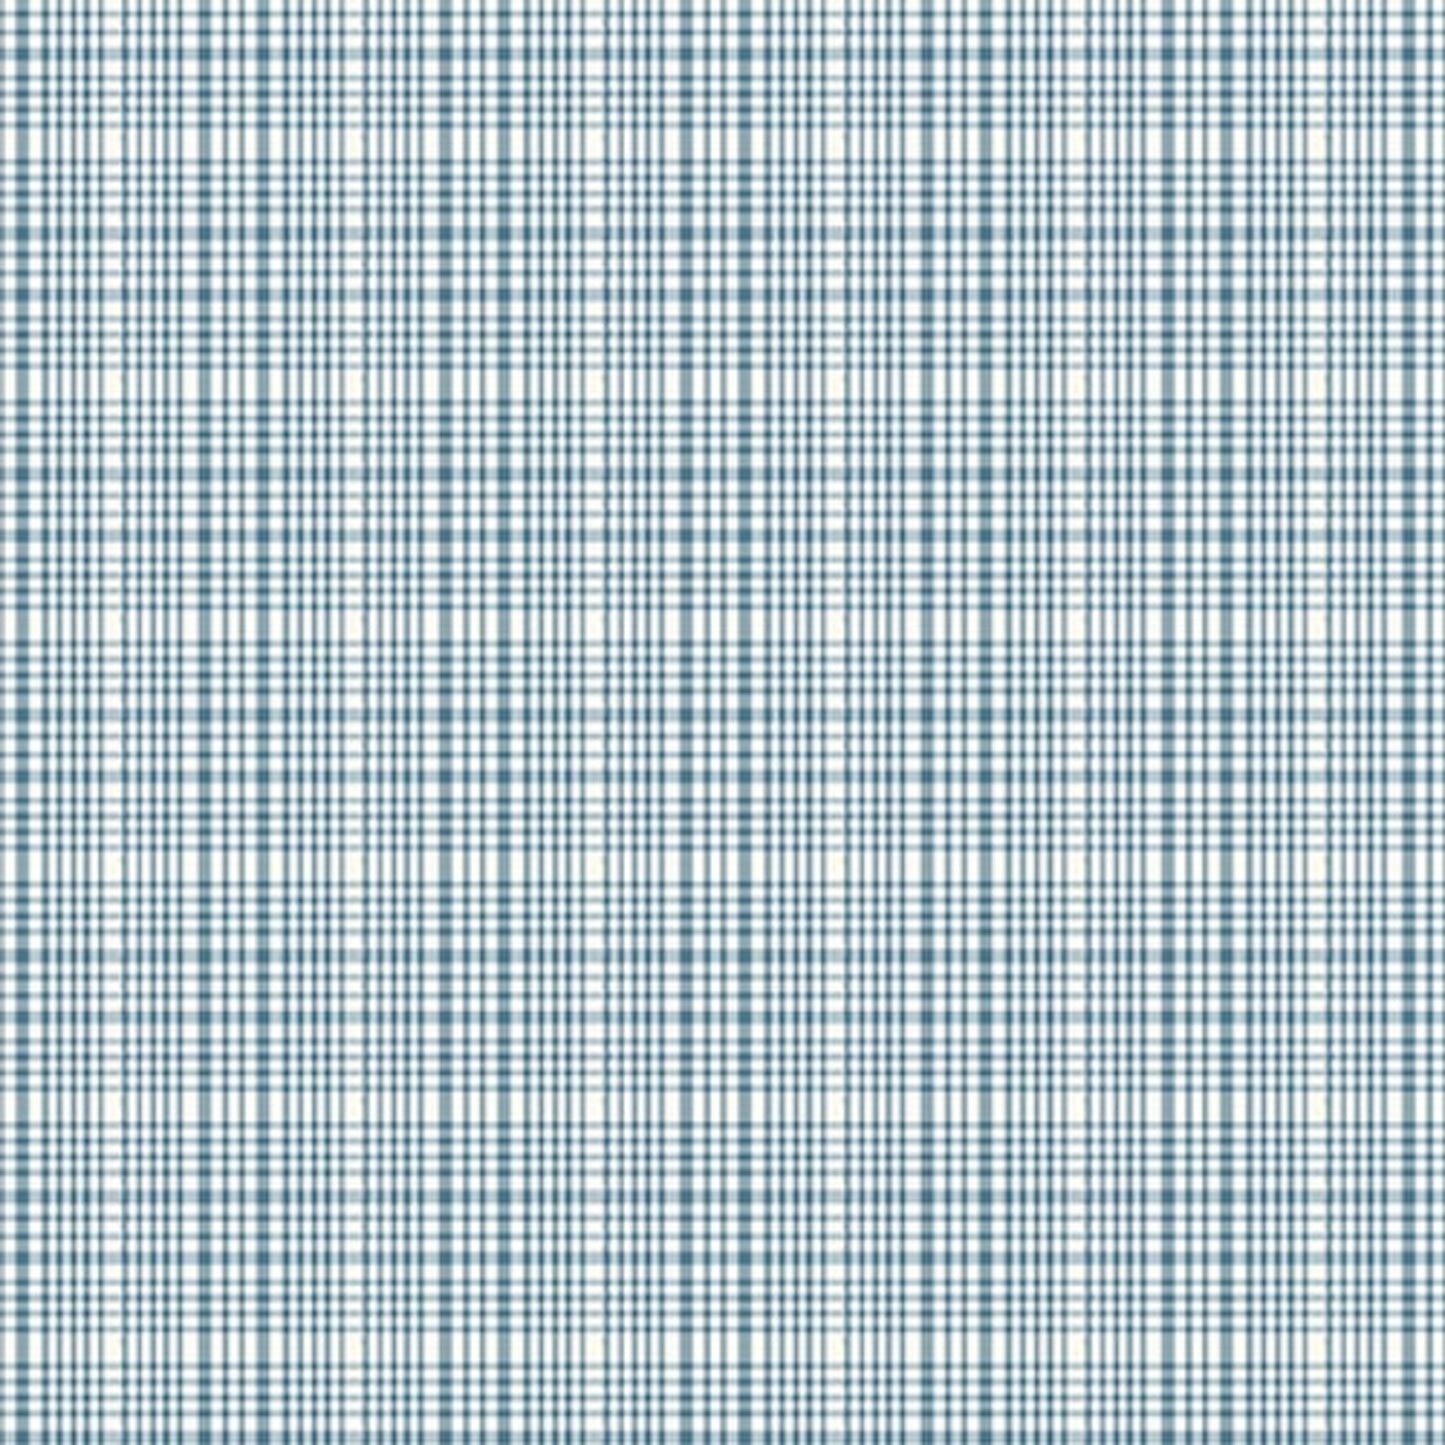 Friday Harbor- Light Blue Window Pane Plaid: Sold by the 1/2 Yard